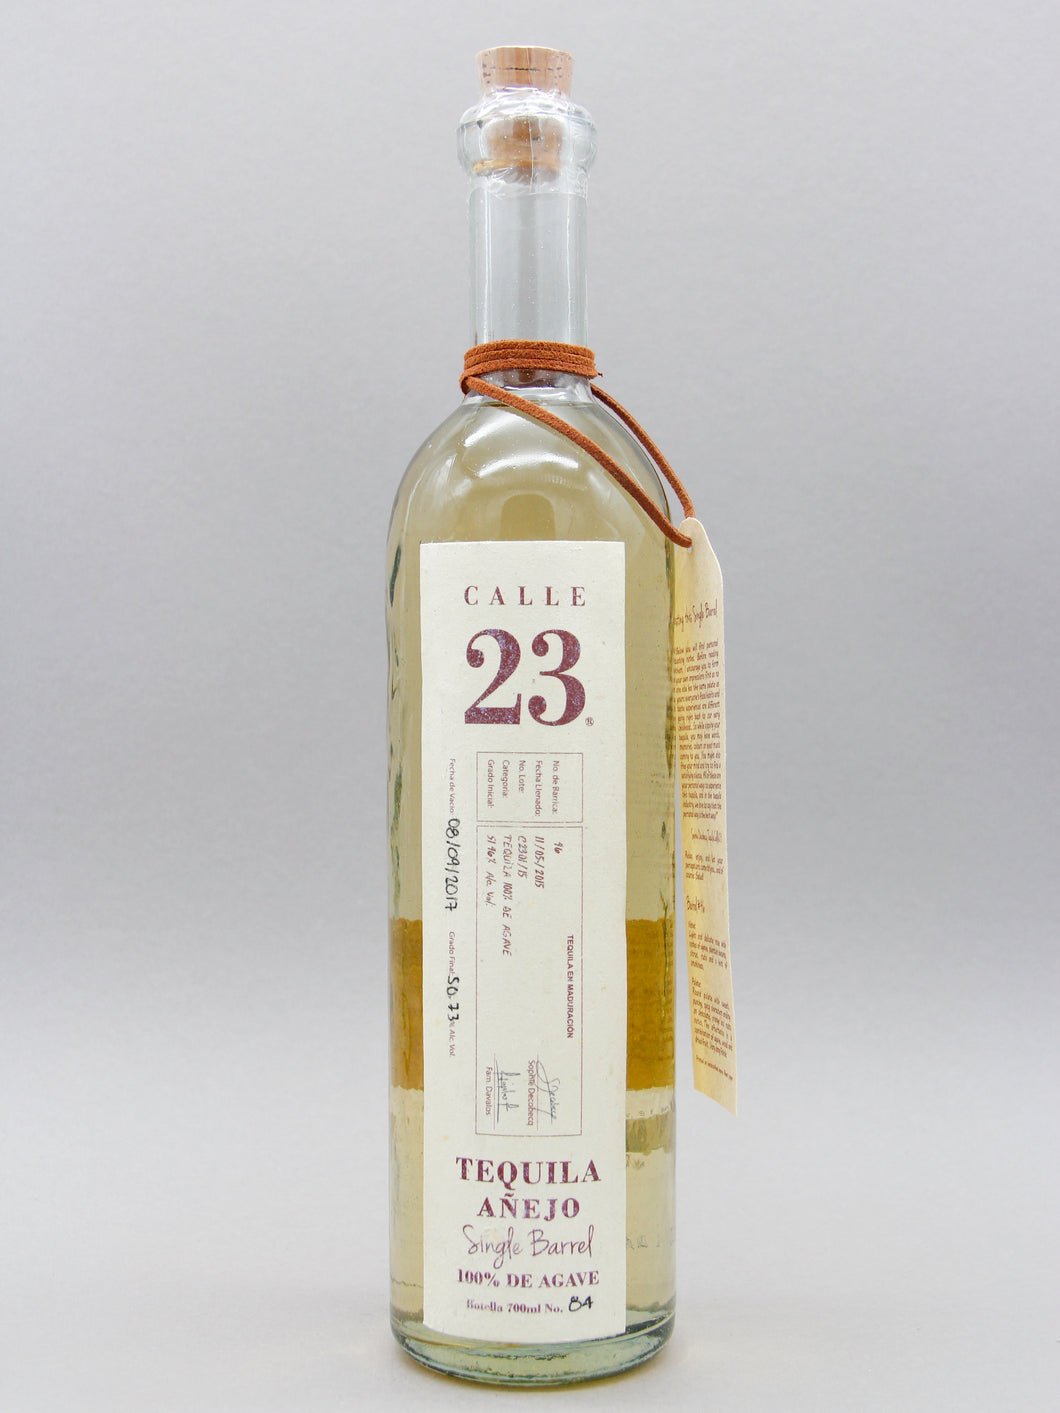 Calle 23 Single Barrel Tequila Anejo, Lote 46 (50.73%, 70cl)